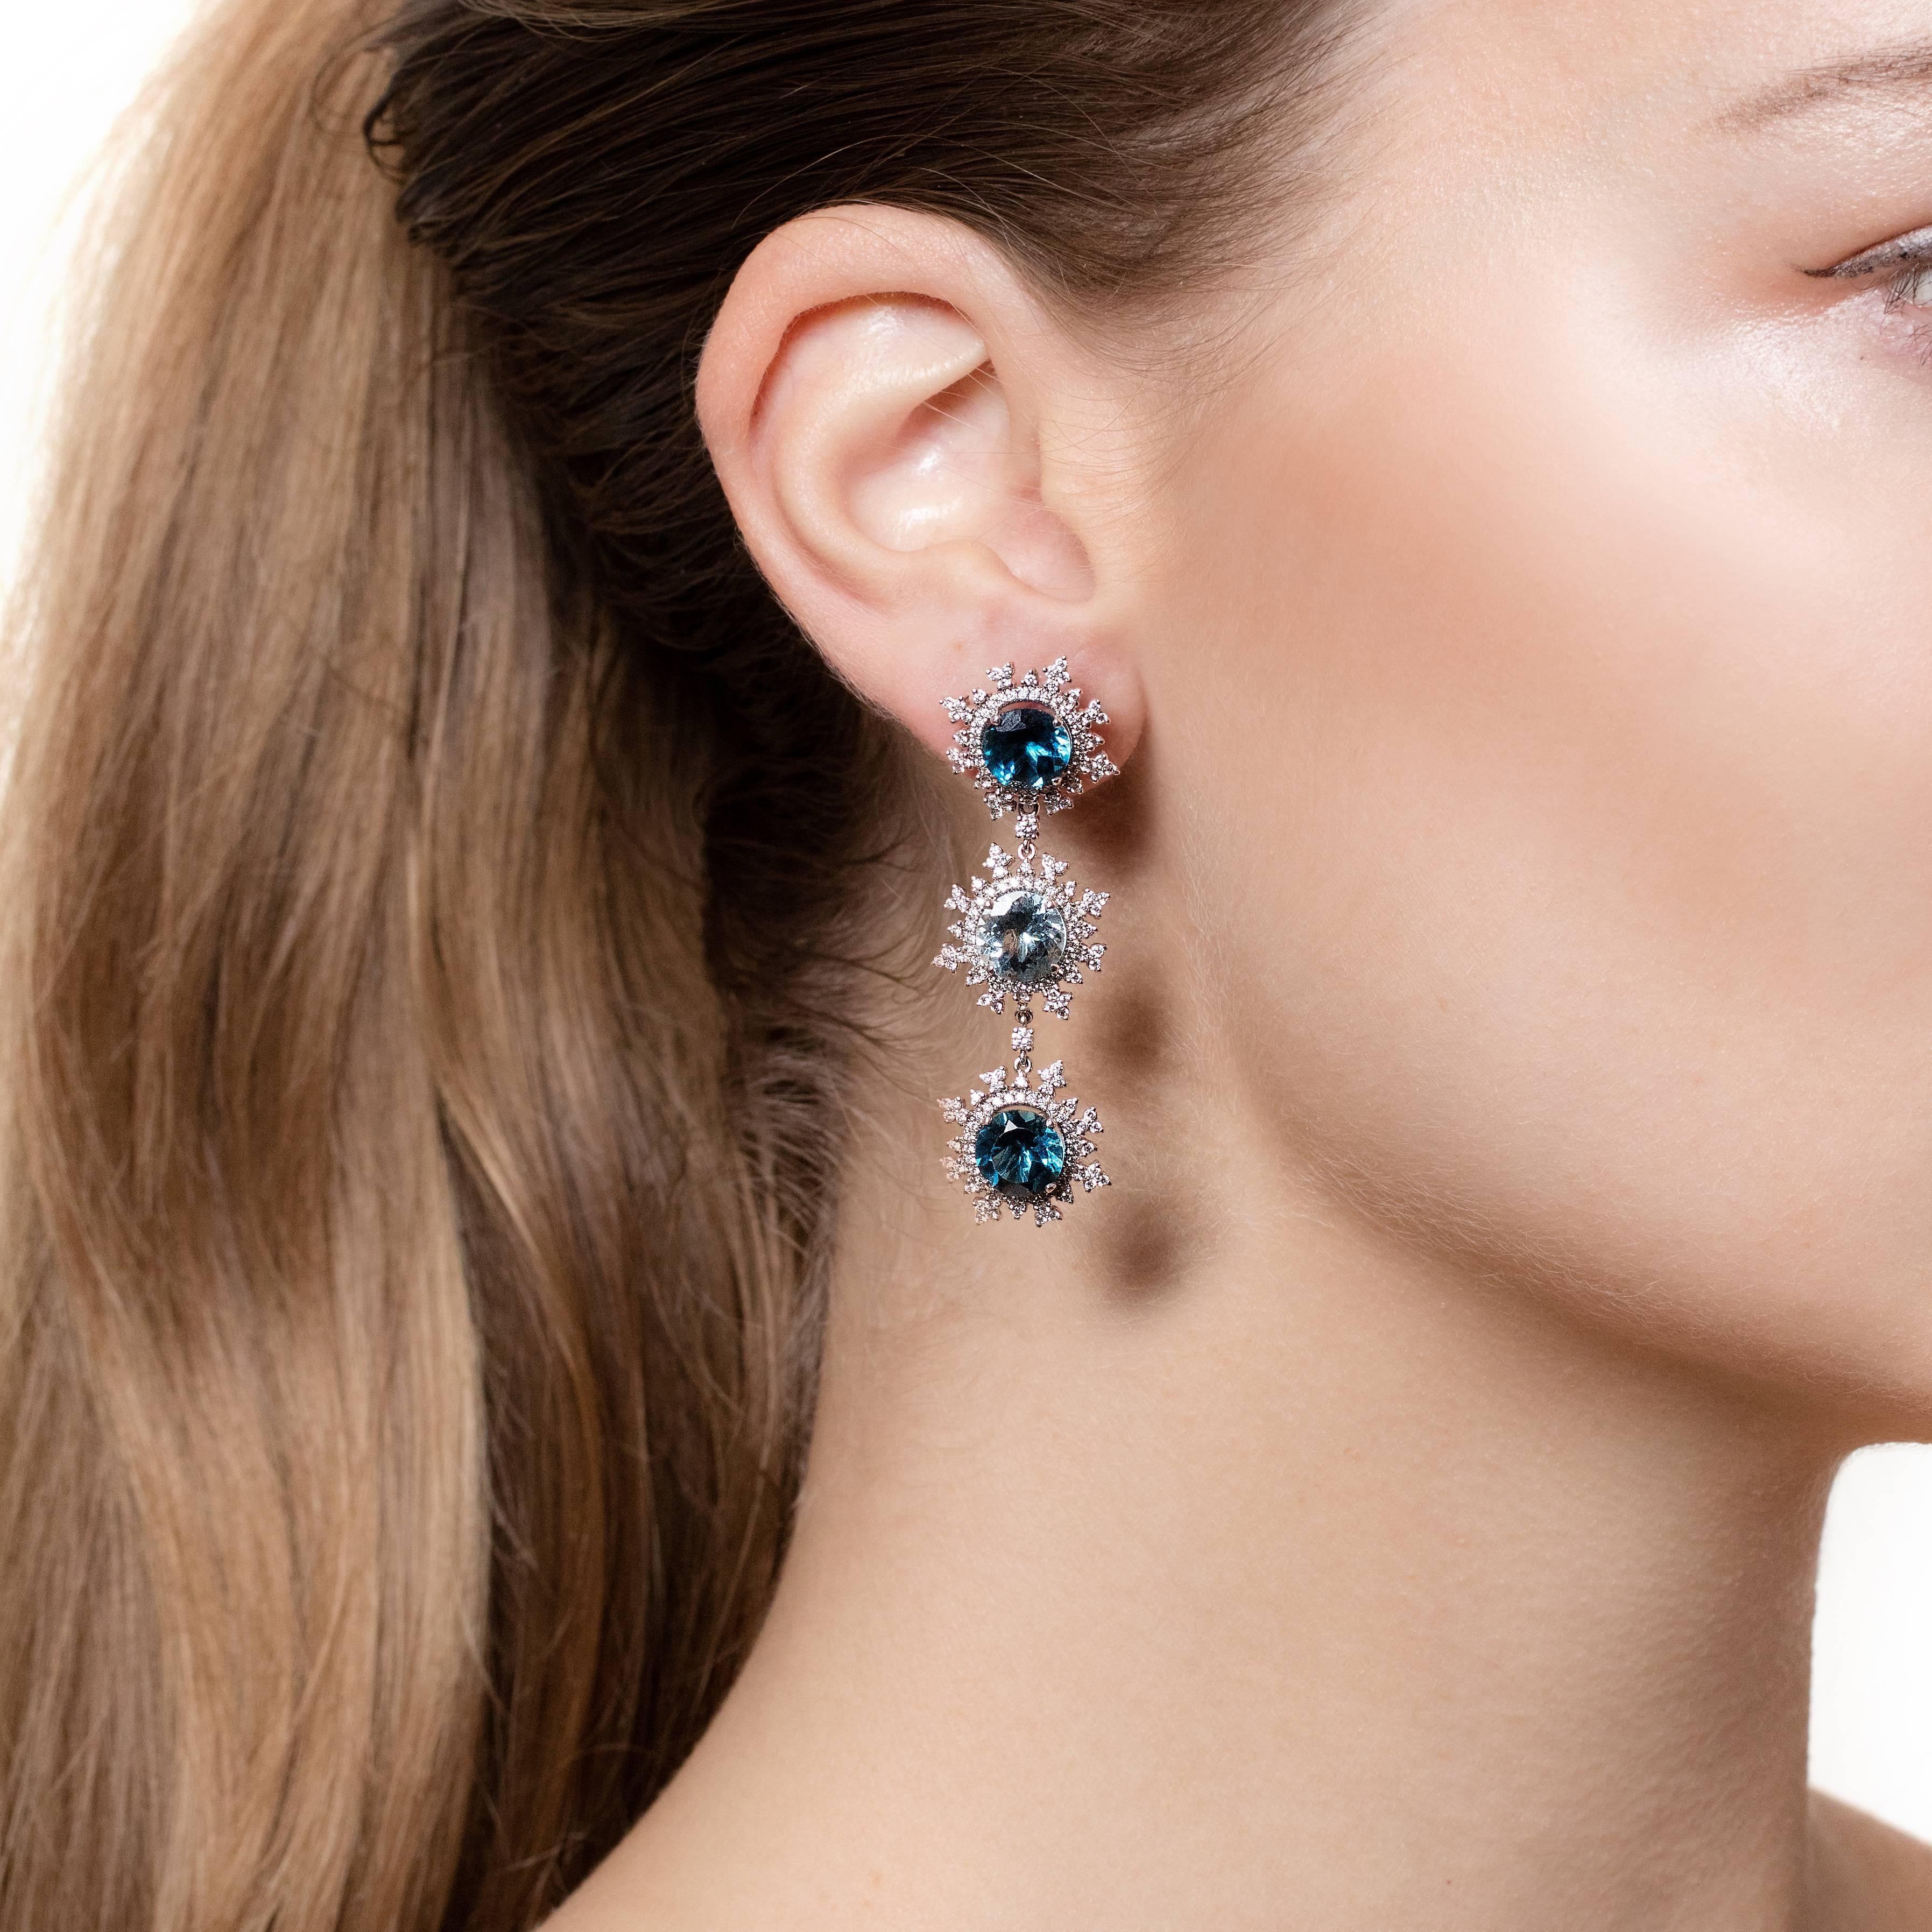 A stunning pair of long detachable flake earrings that are made from 18ct. white gold with aquamarine, deep blue topaz and surrounded by 338 diamonds. They are part of Nadine Aysoy’s Tsarina Collection where nature is an incredible source of